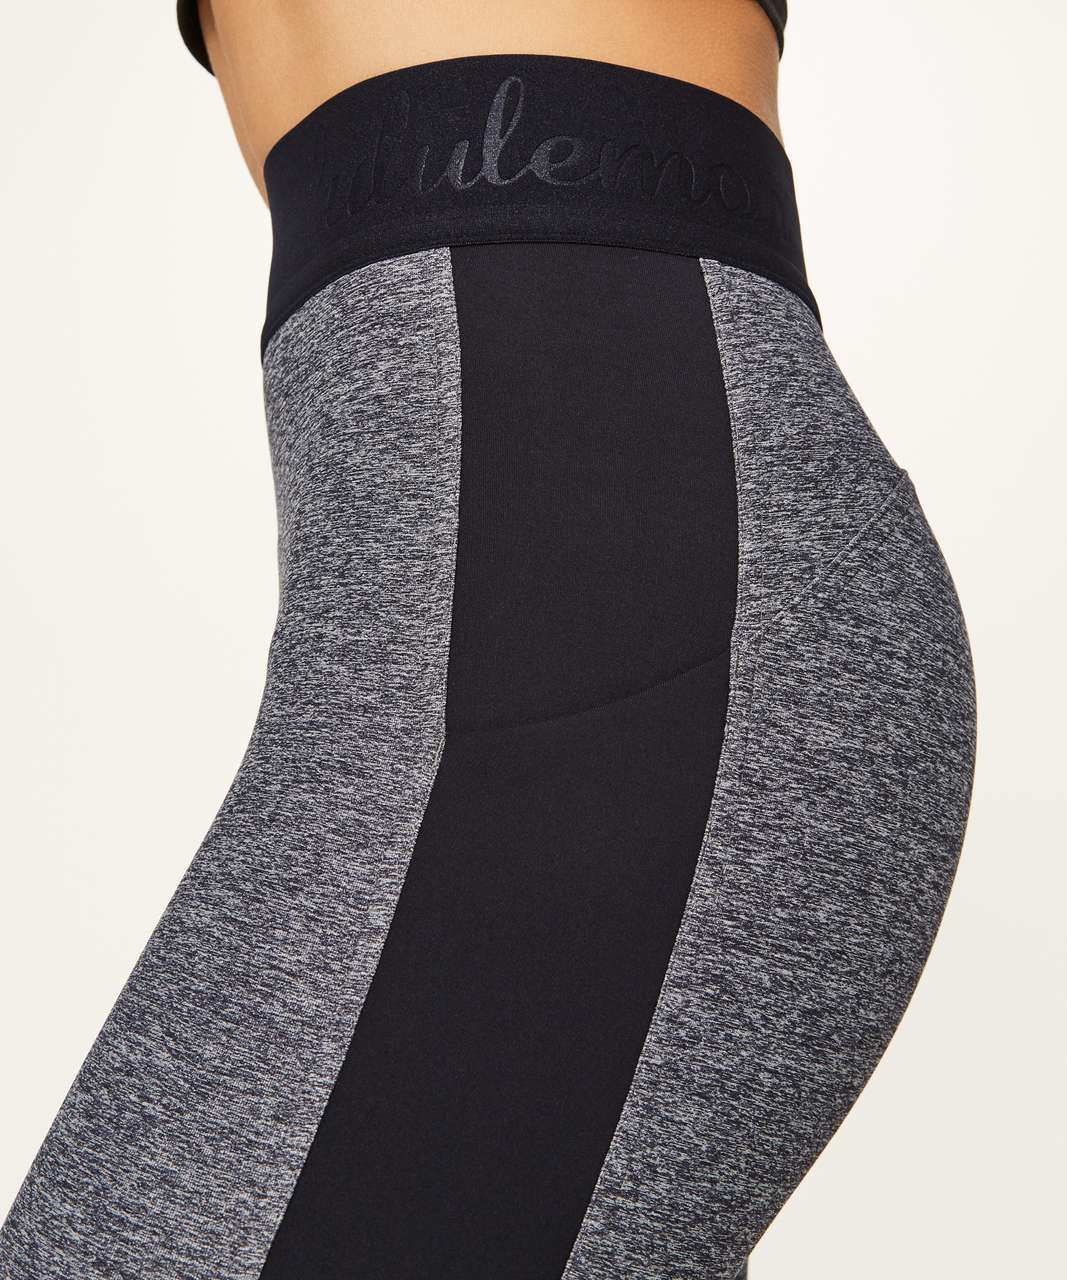 Lululemon Box It Out Tight - Heathered Black / Black (First Release ...